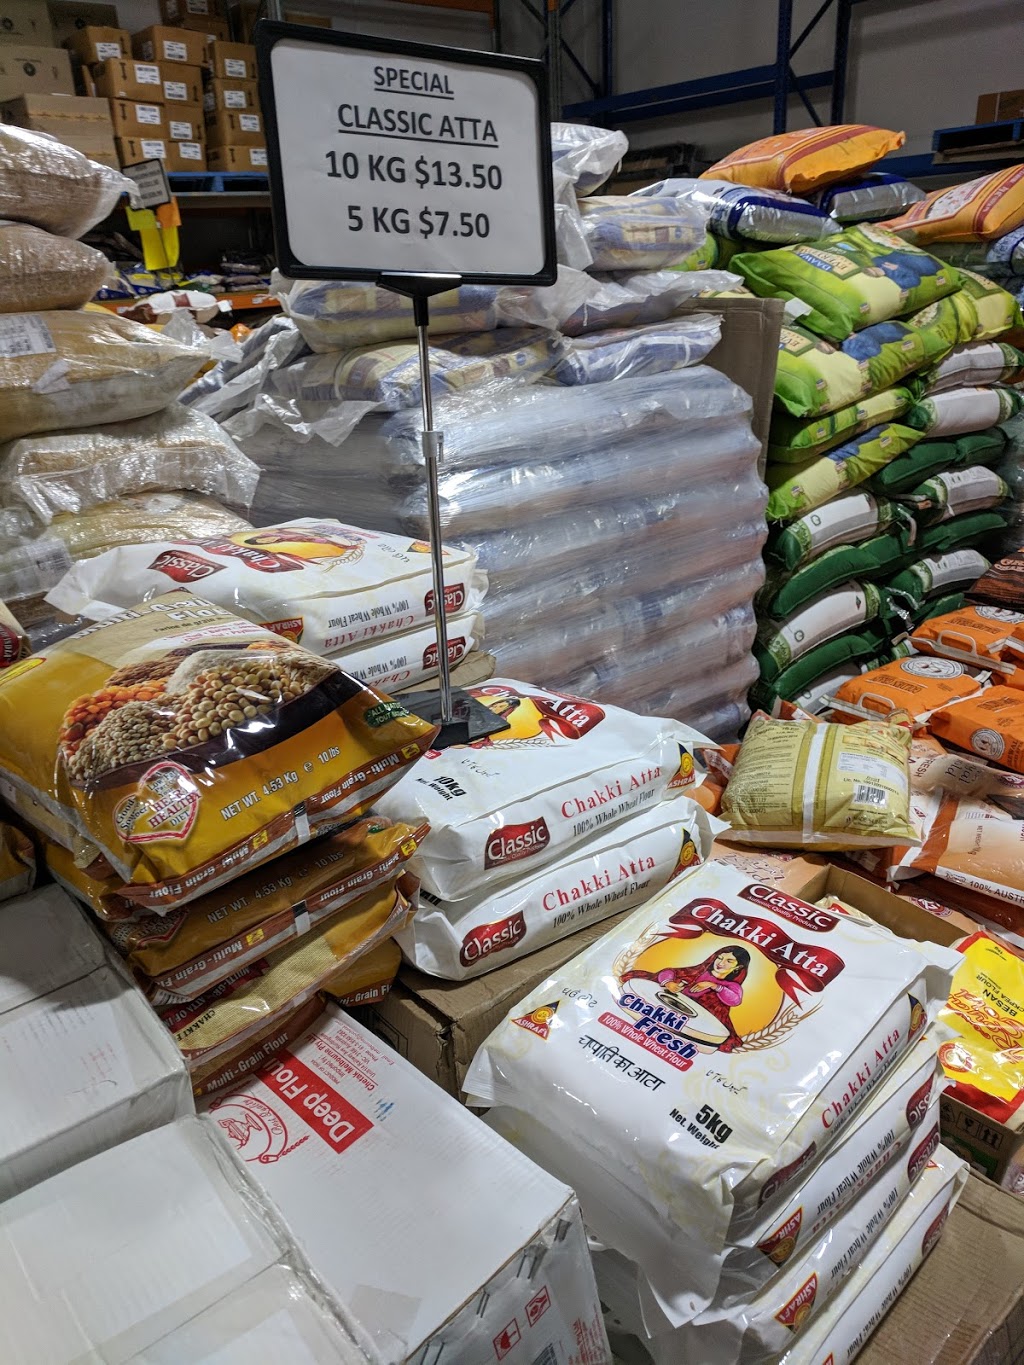 indiagate Spices & Groceries | store | 14c/560-590 High St, Epping VIC 3076, Australia | 0394087572 OR +61 3 9408 7572